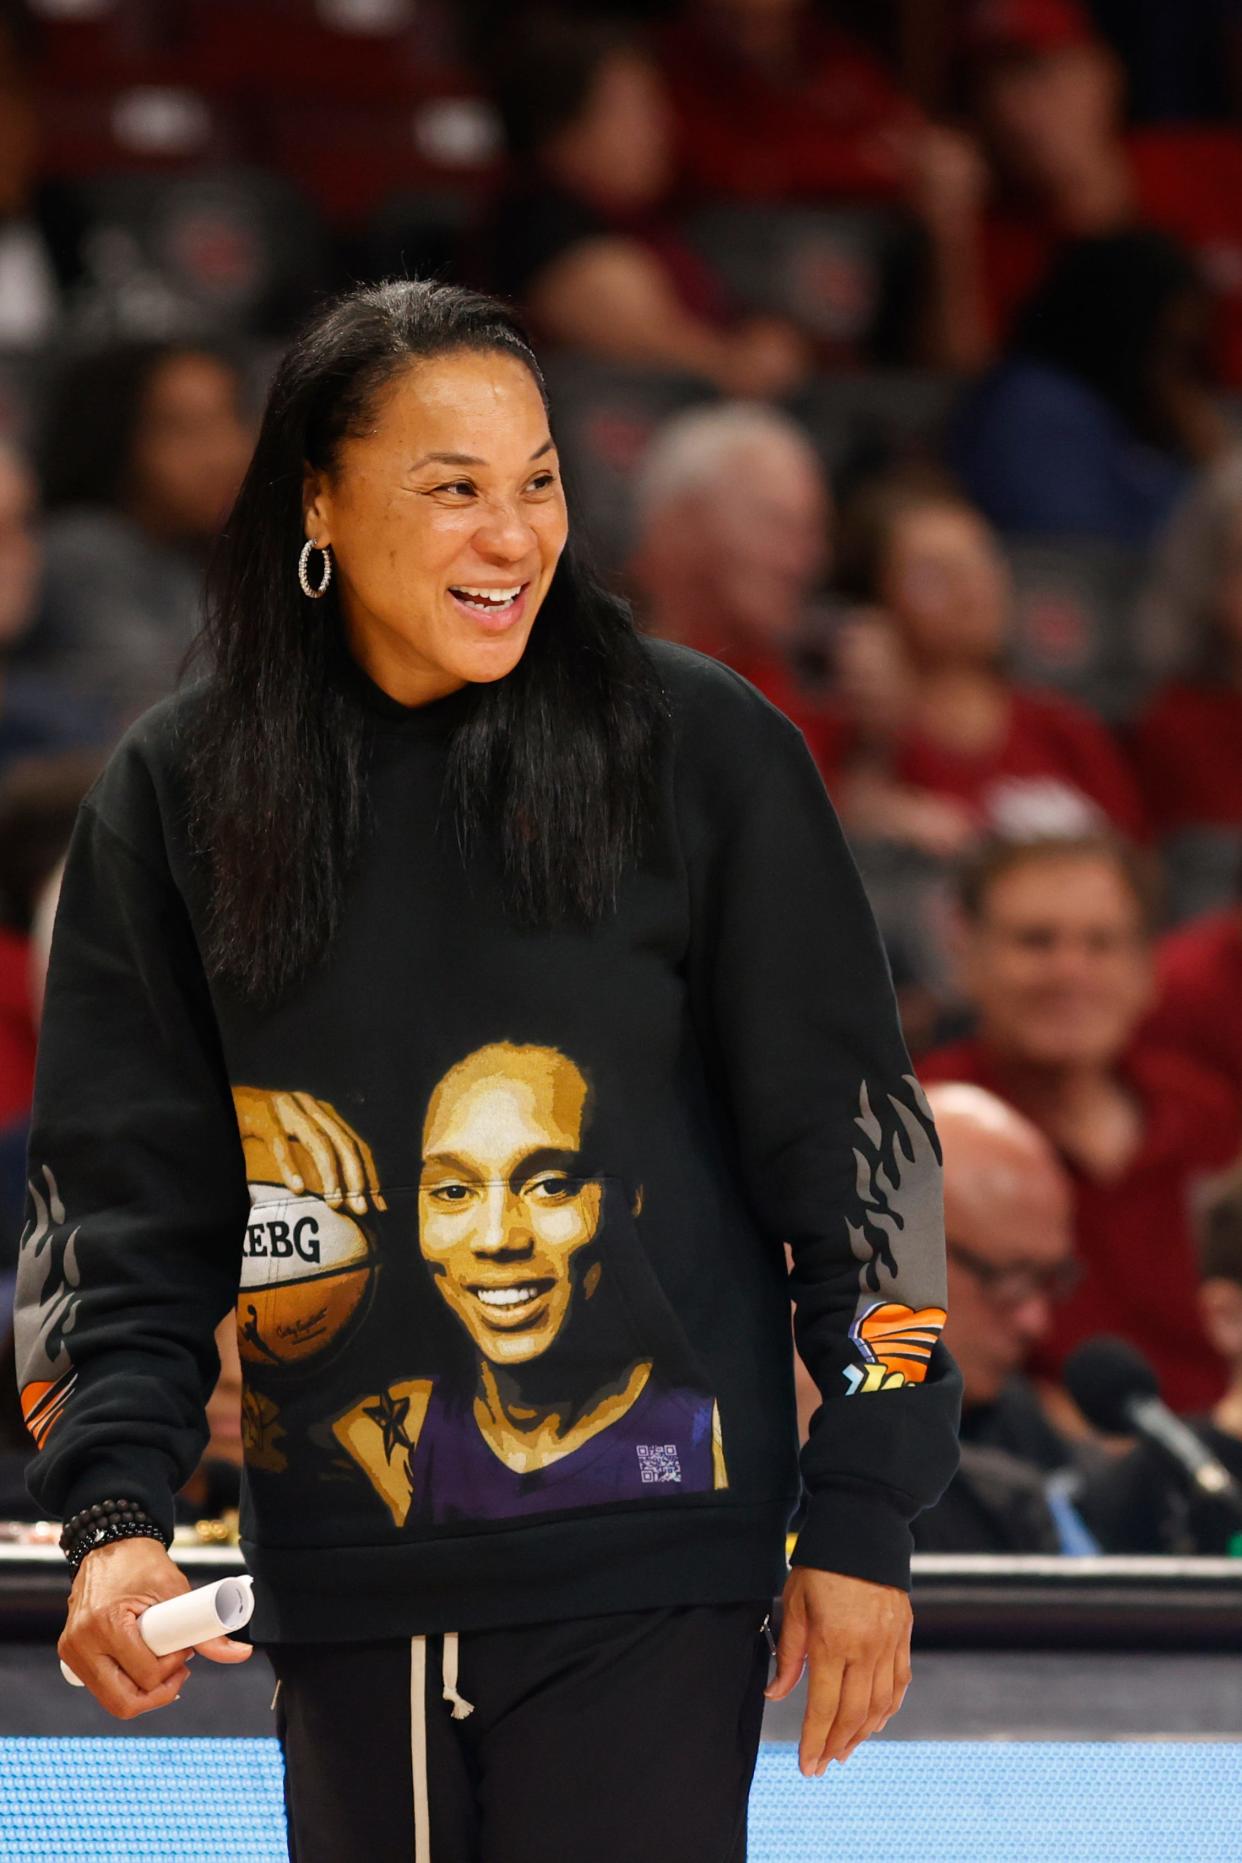 South Carolina basketball coach Dawn Staley wore a shirt with Brittney Griner's image on it during the Gamecocks' opening game of the 2022-23 season on Nov. 7. Griner was released from a Russian prison on Thursday.